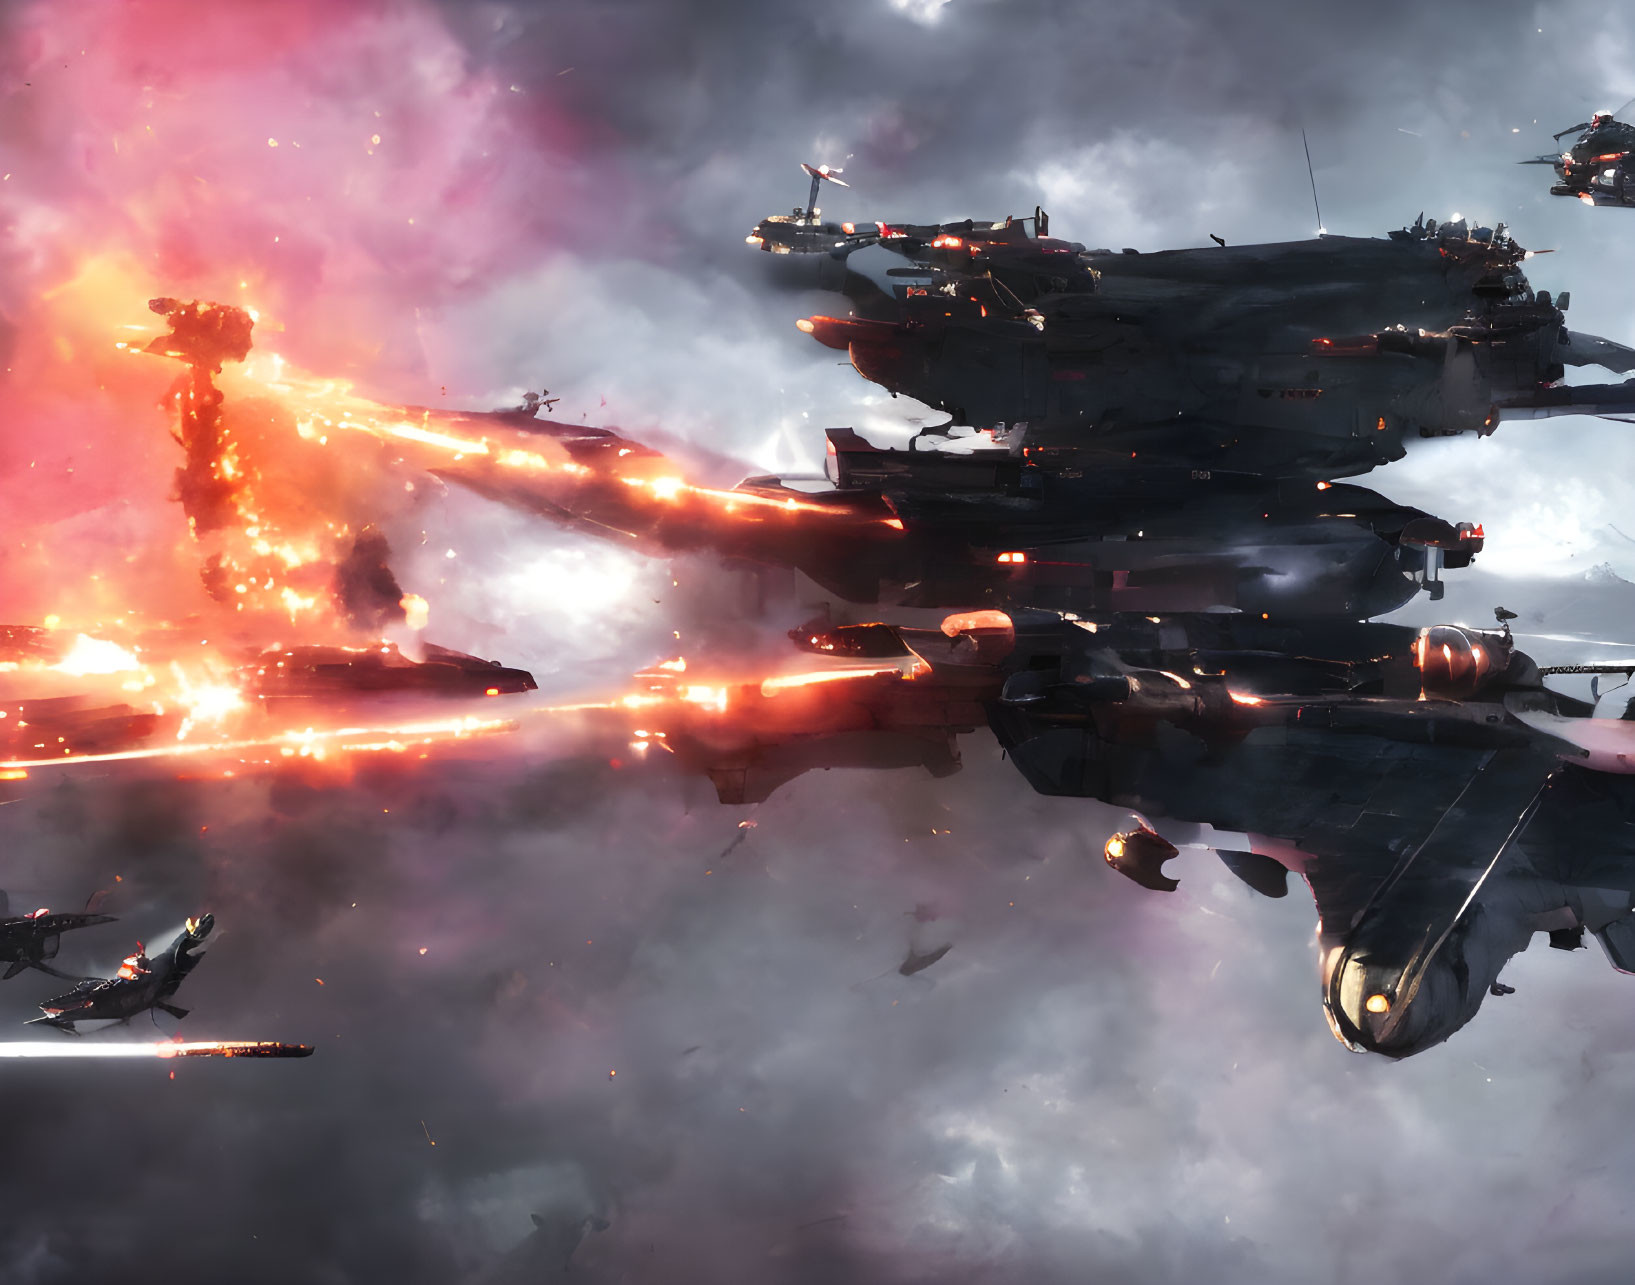 Futuristic spaceships in fiery battle with orange and red explosions